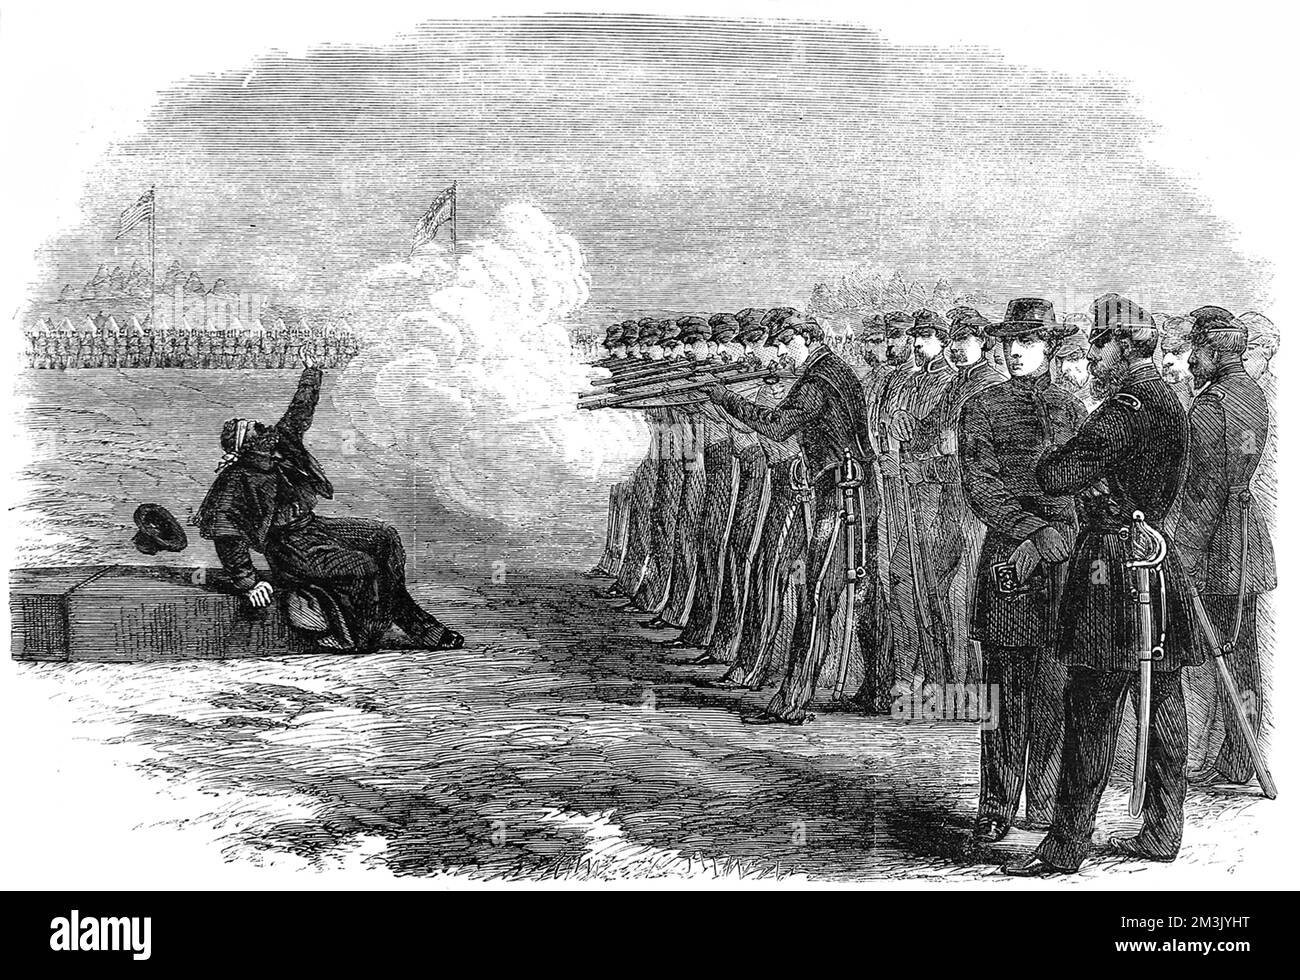 Firing squad shooting a blindfolded Federal soldier for desertion during the American Civil War.     Date: 1862 Stock Photo